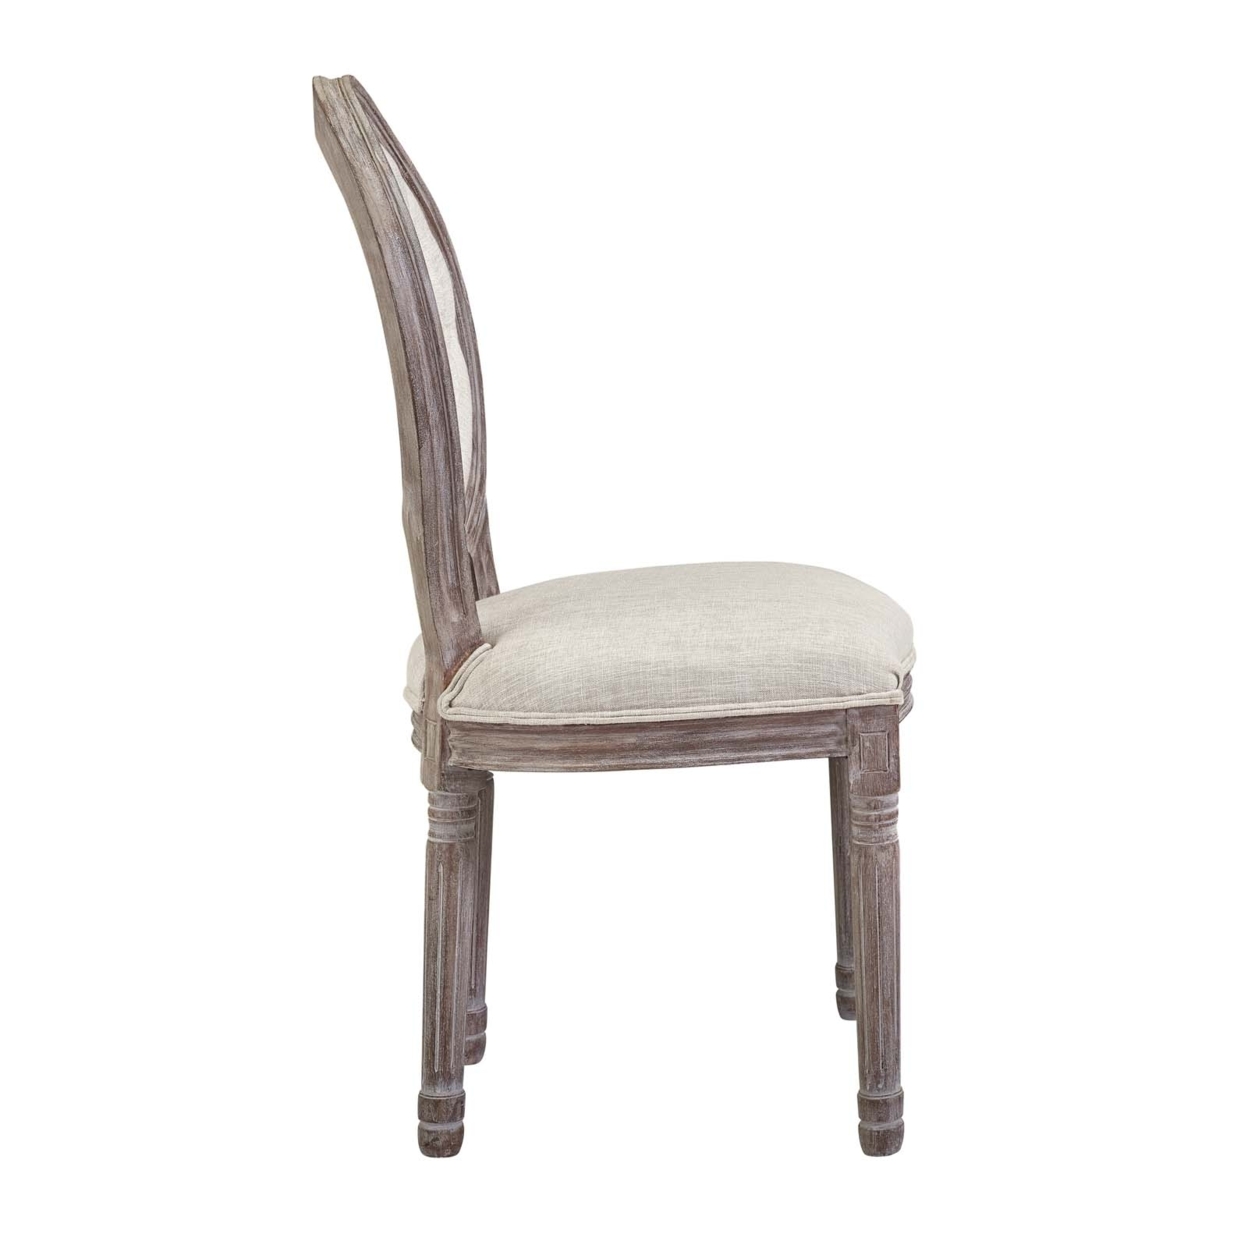 Arise Vintage French Upholstered Fabric Dining Side Chair Set Of 2,Beige